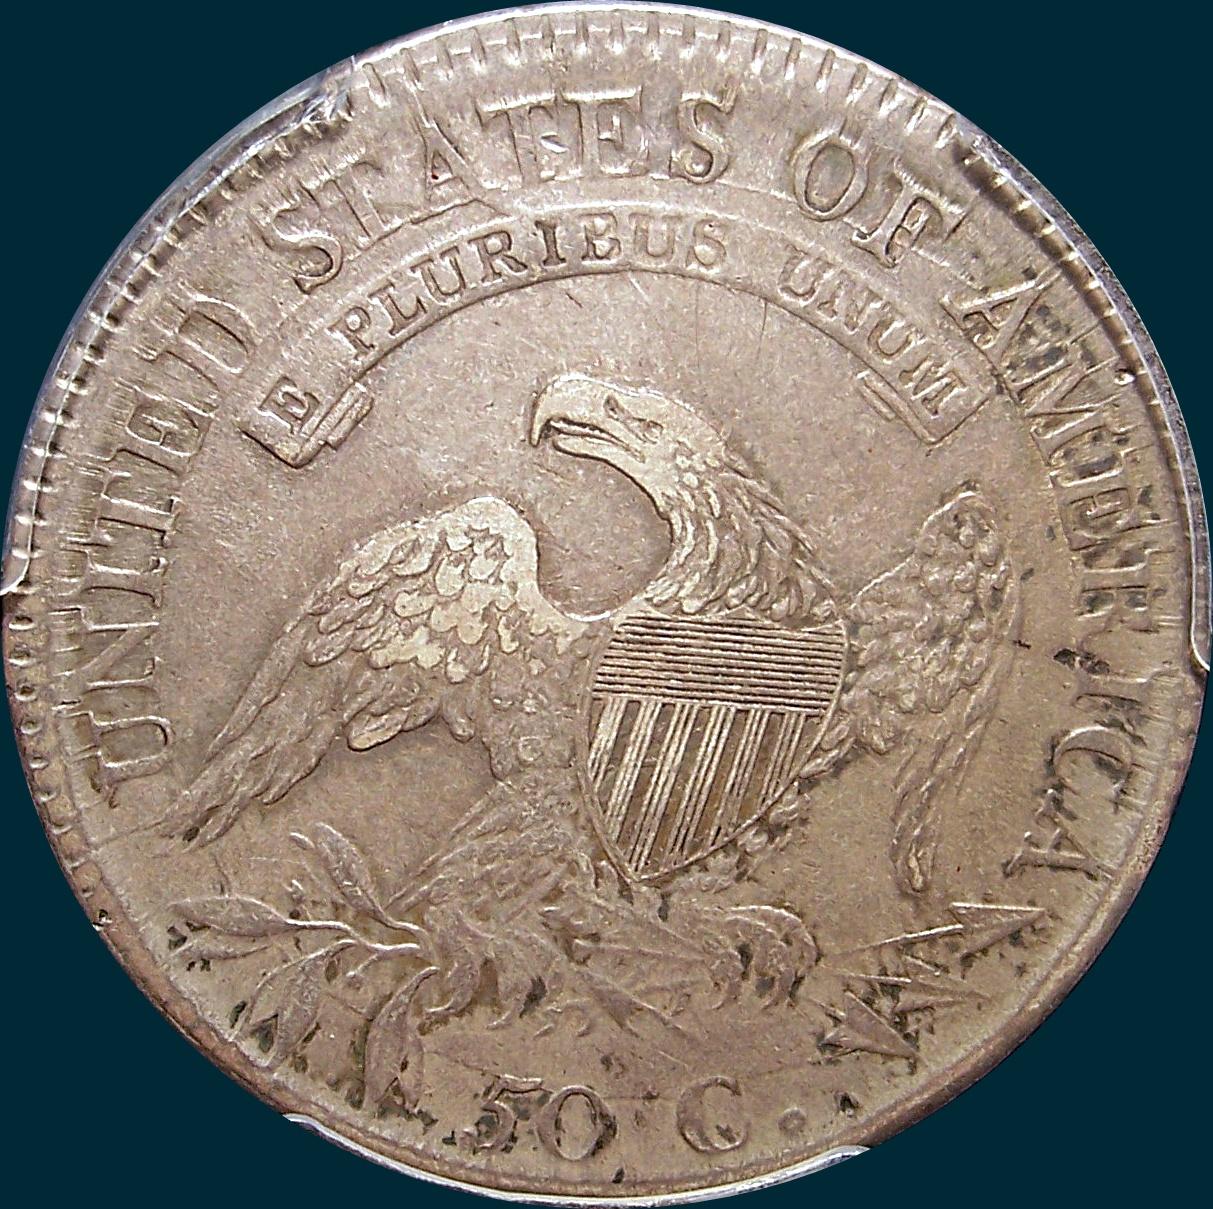 1811, O-107, Small 8, Capped Bust, Half Dollar